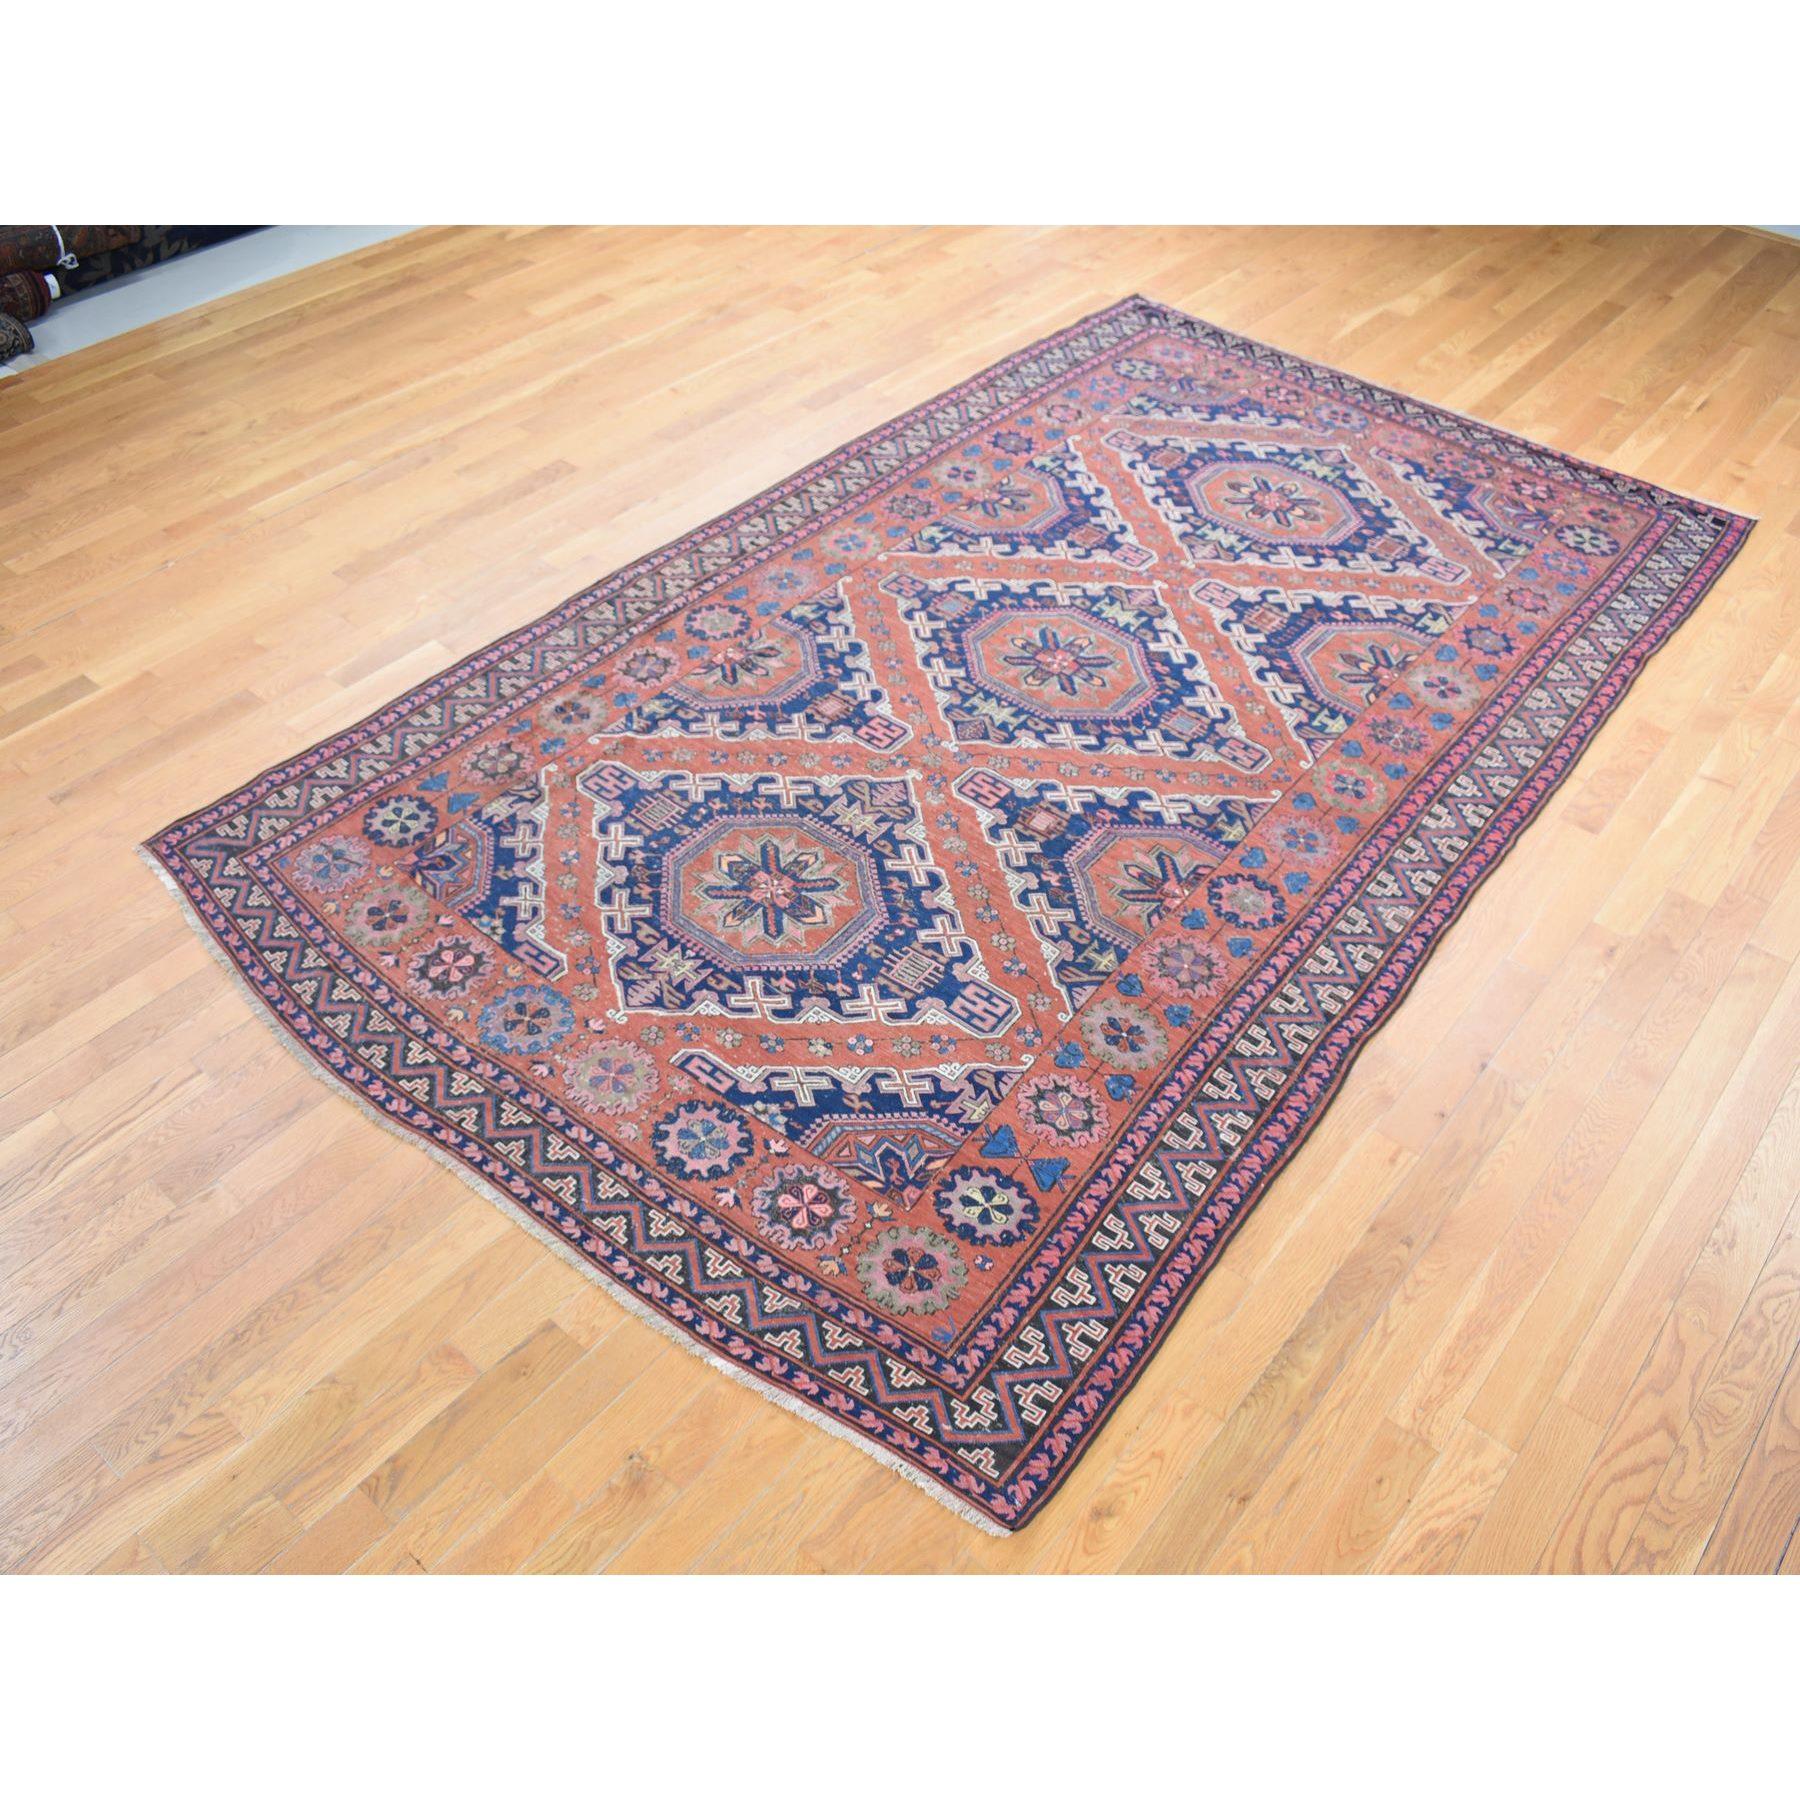 Medieval Cinnamon Red Antique Caucasian Soumak Pure Wool Flat Weave Hand Knotted Rug For Sale